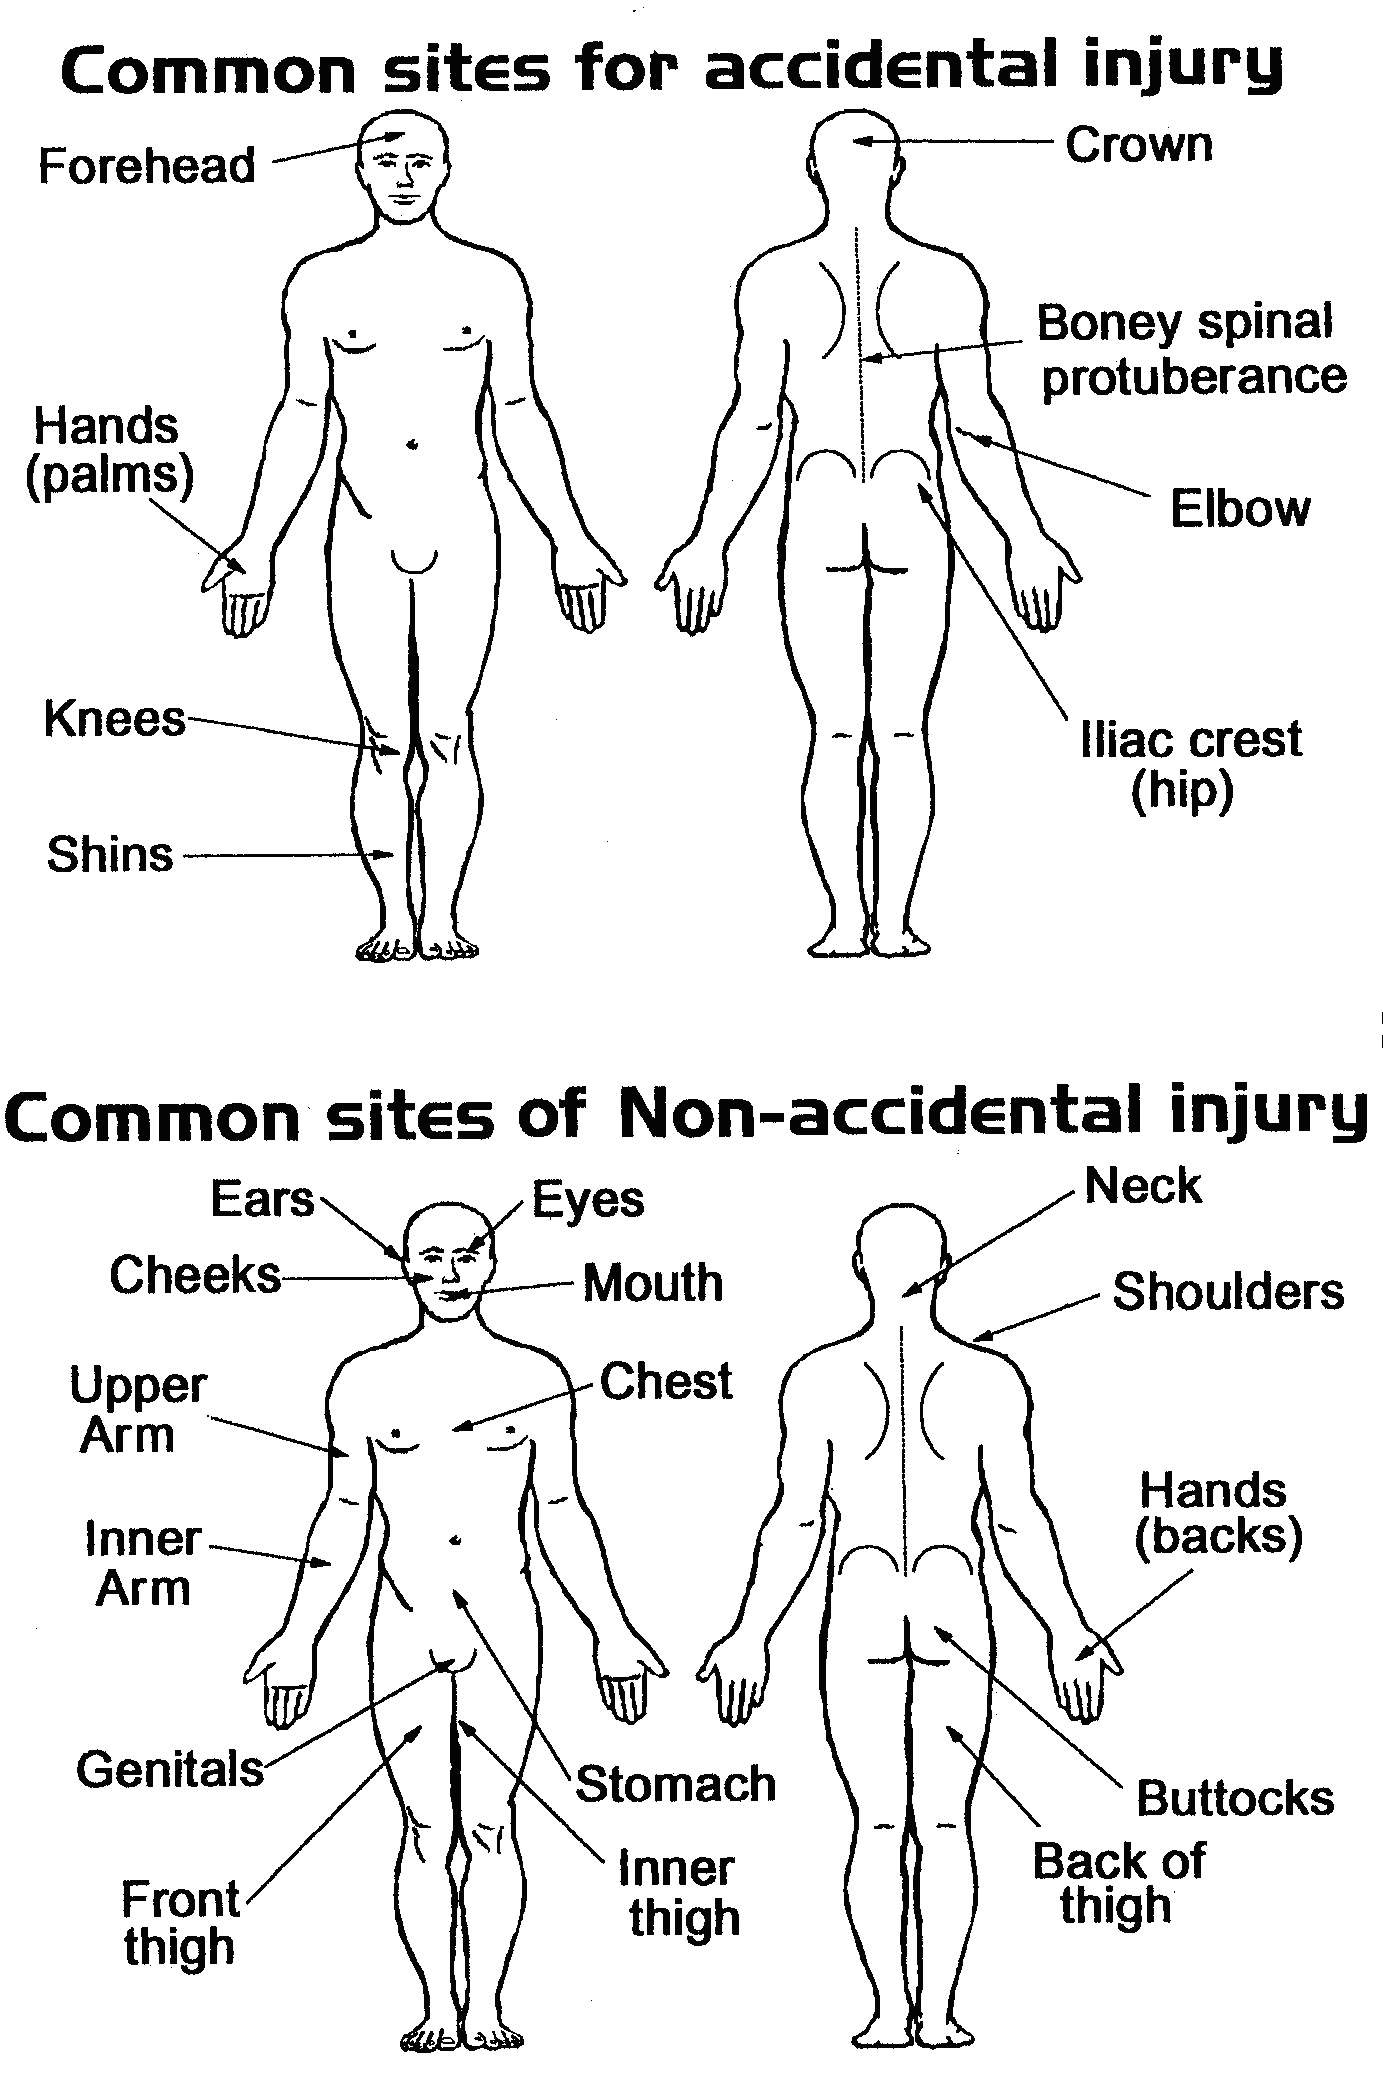 Diagram showing typical sites of accidental injury, contrasted with sites of non-accidental injury